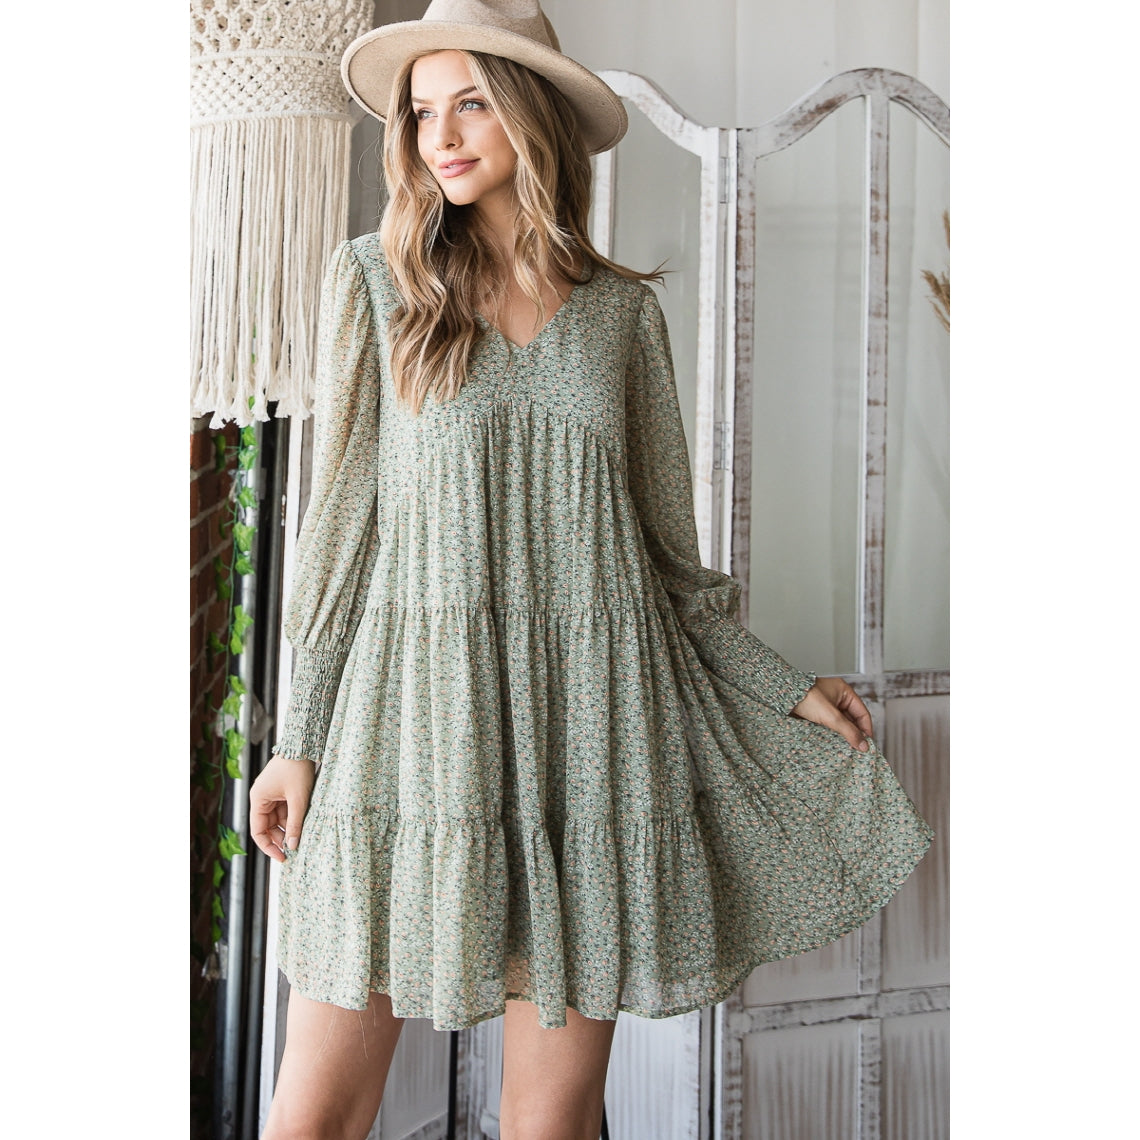 Sage Tiered Ruffle Floral Dress